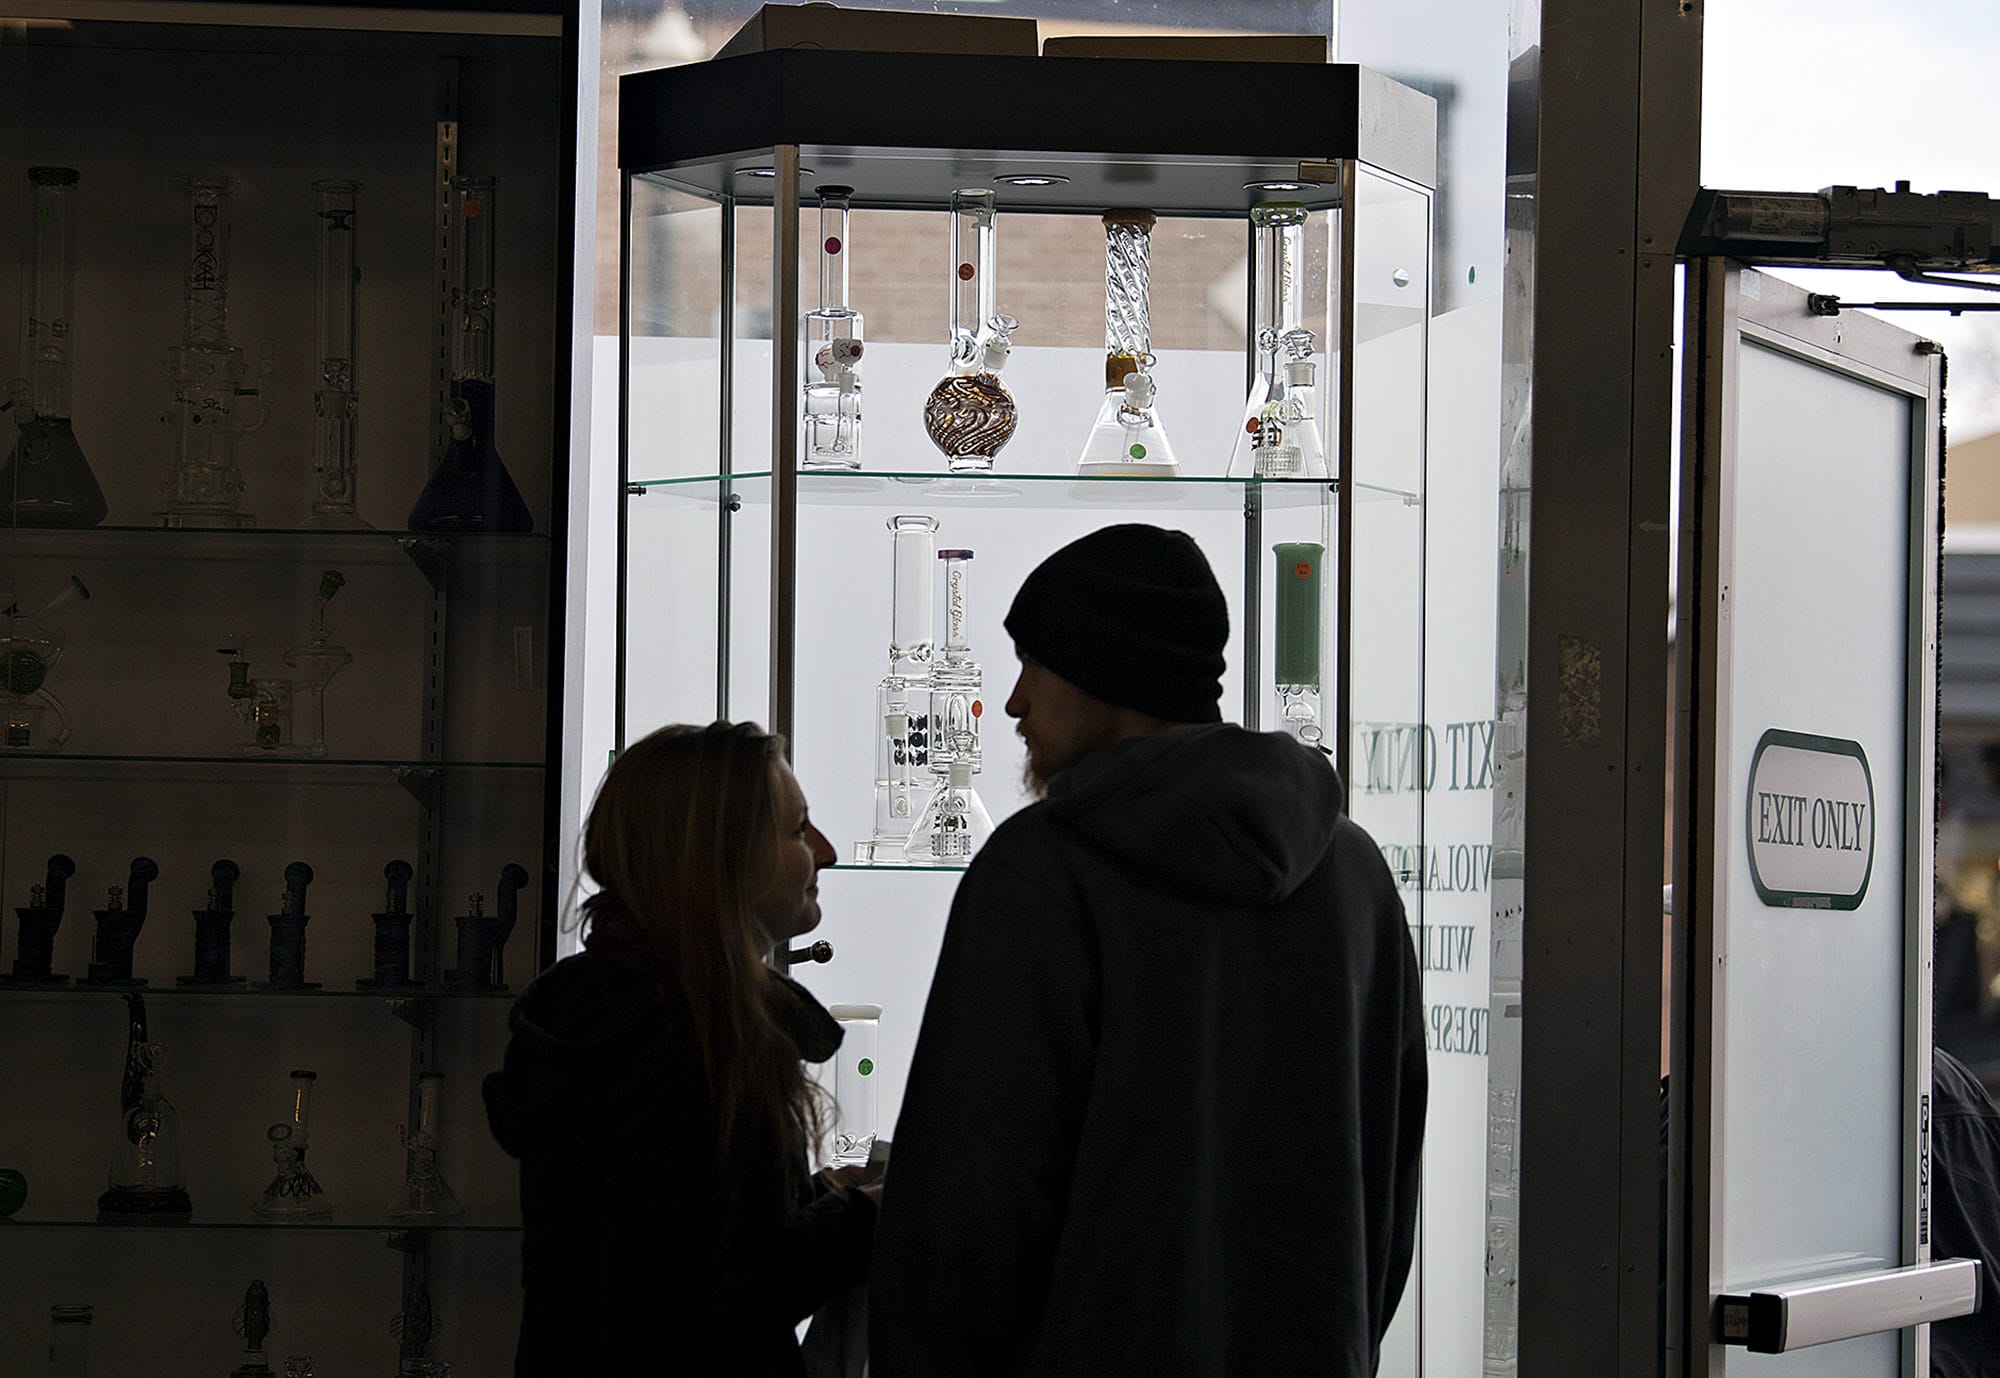 Samantha Rosaaen of Oregon City, left, looks over the selection of marijuana-related products at Main Street Marijuana with her boyfriend, Tanner Barnett, on Thursday morning. The federal government is talking about rolling back protections for states selling marijuana, such as Washington.